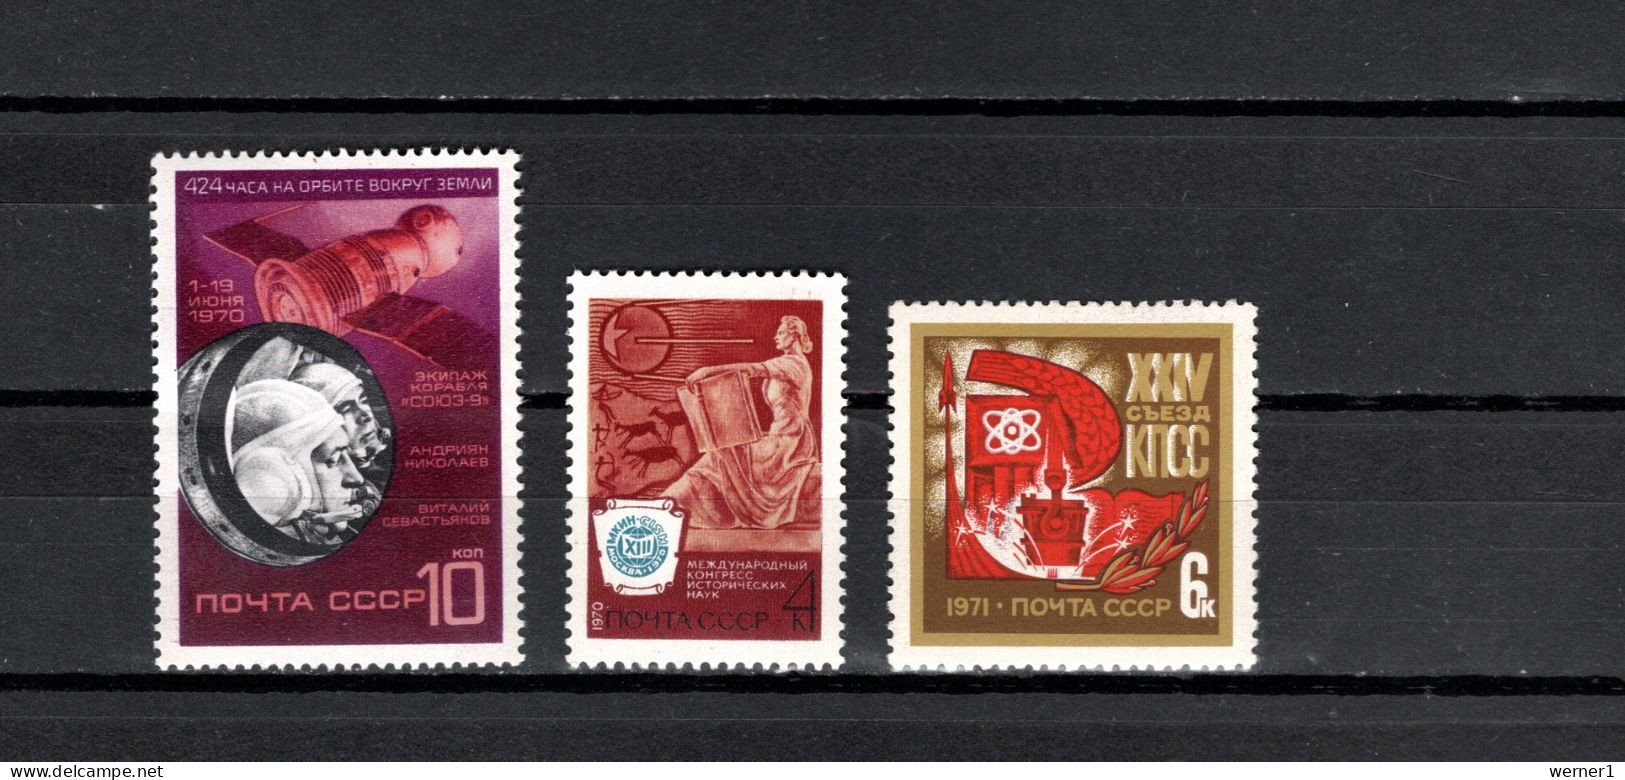 USSR Russia 1970/1971 Space, Soyuz 9, Science Congress, Communist Party, 3 Stamps MNH - Russia & URSS